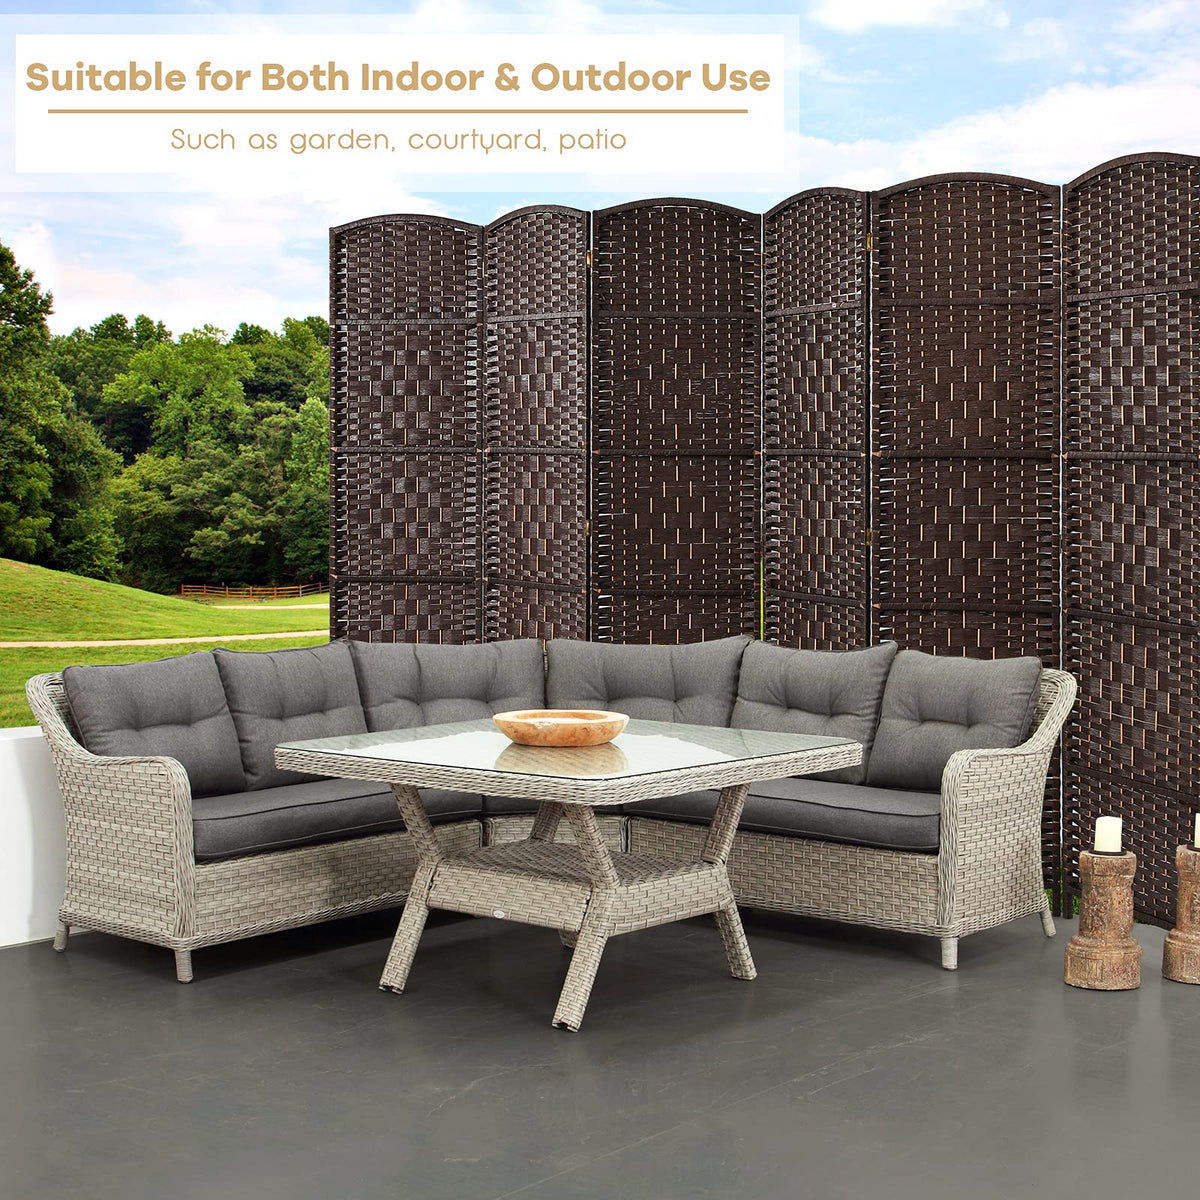 6-Panel Screen Room Divider, 6Ft Folding Privacy Screen w/Hand-woven Rattan